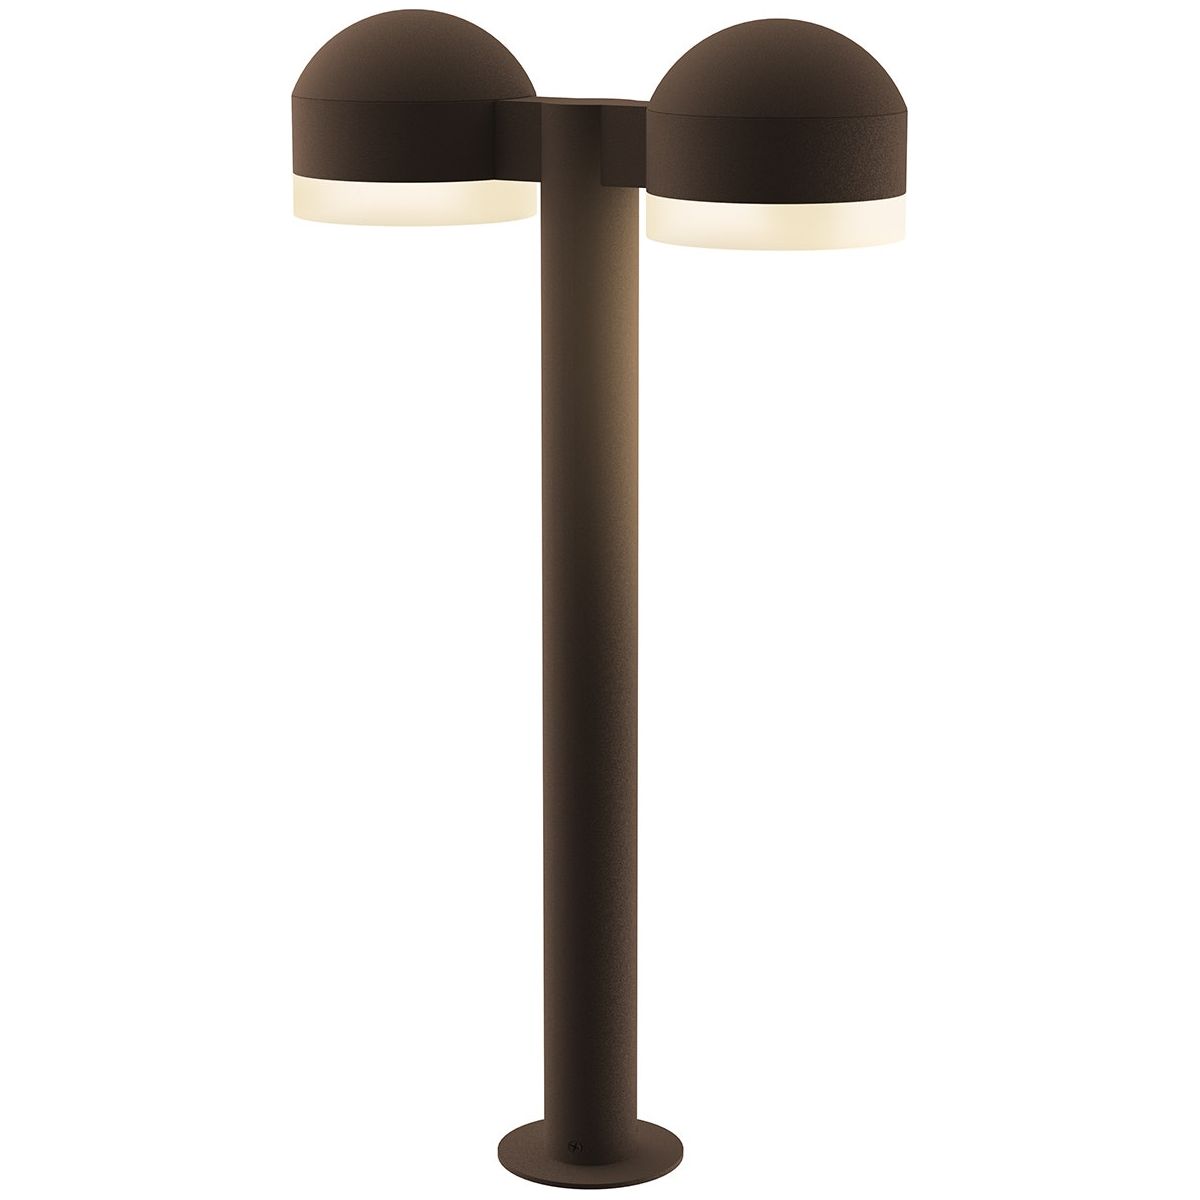 REALS 22" LED Double Bollard with Dome Cap and Cylinder Lens